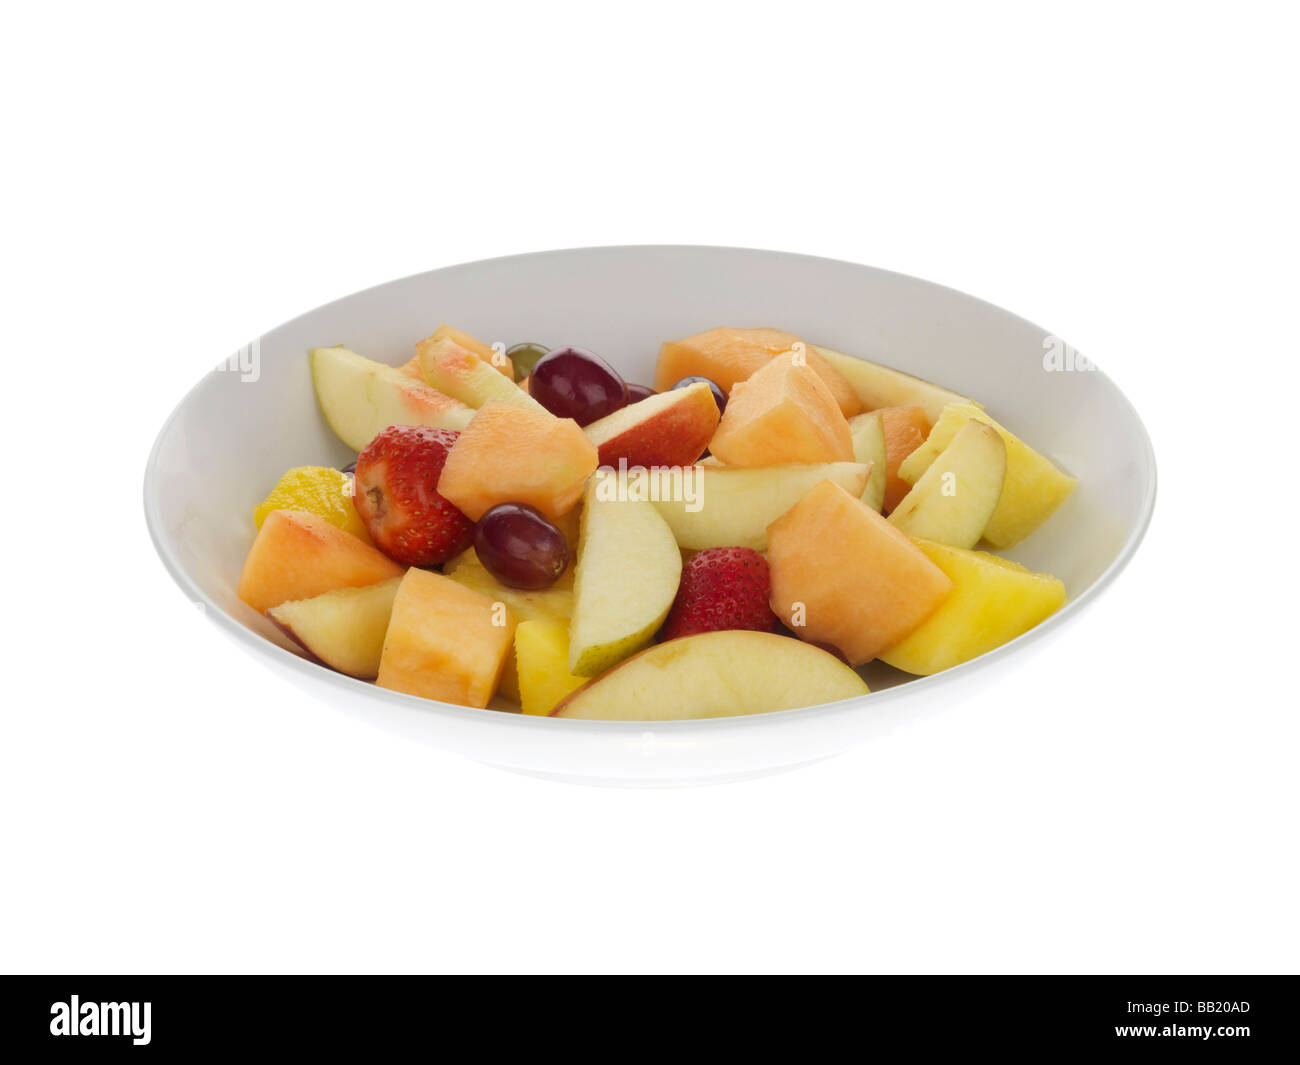 Fresh Healthy Bowl Of Organic Fruit Salad Isolated Against A White Background With No People And A Clipping Path Stock Photo